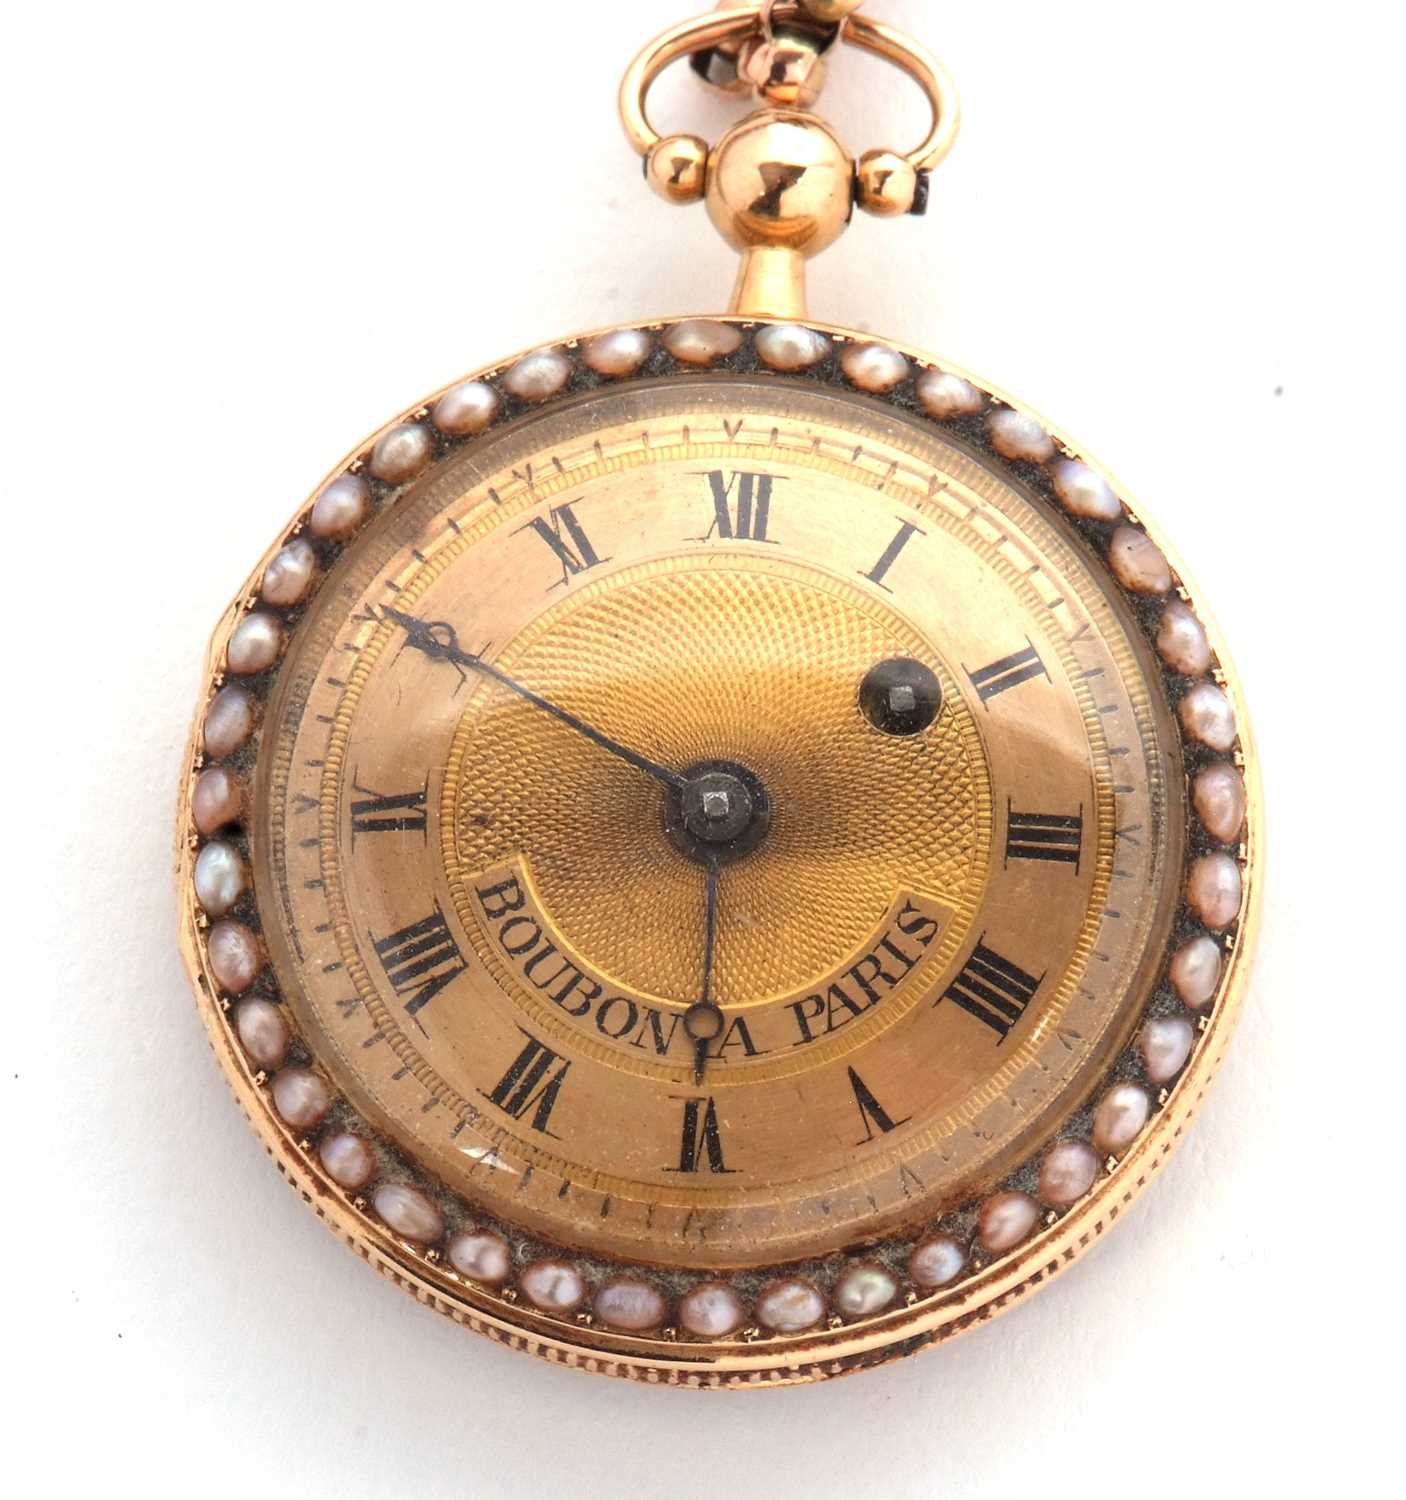 A Boubon a Paris mid grade yellow metal fob watch with chain, the pocket watch has a seed pearl - Image 6 of 9